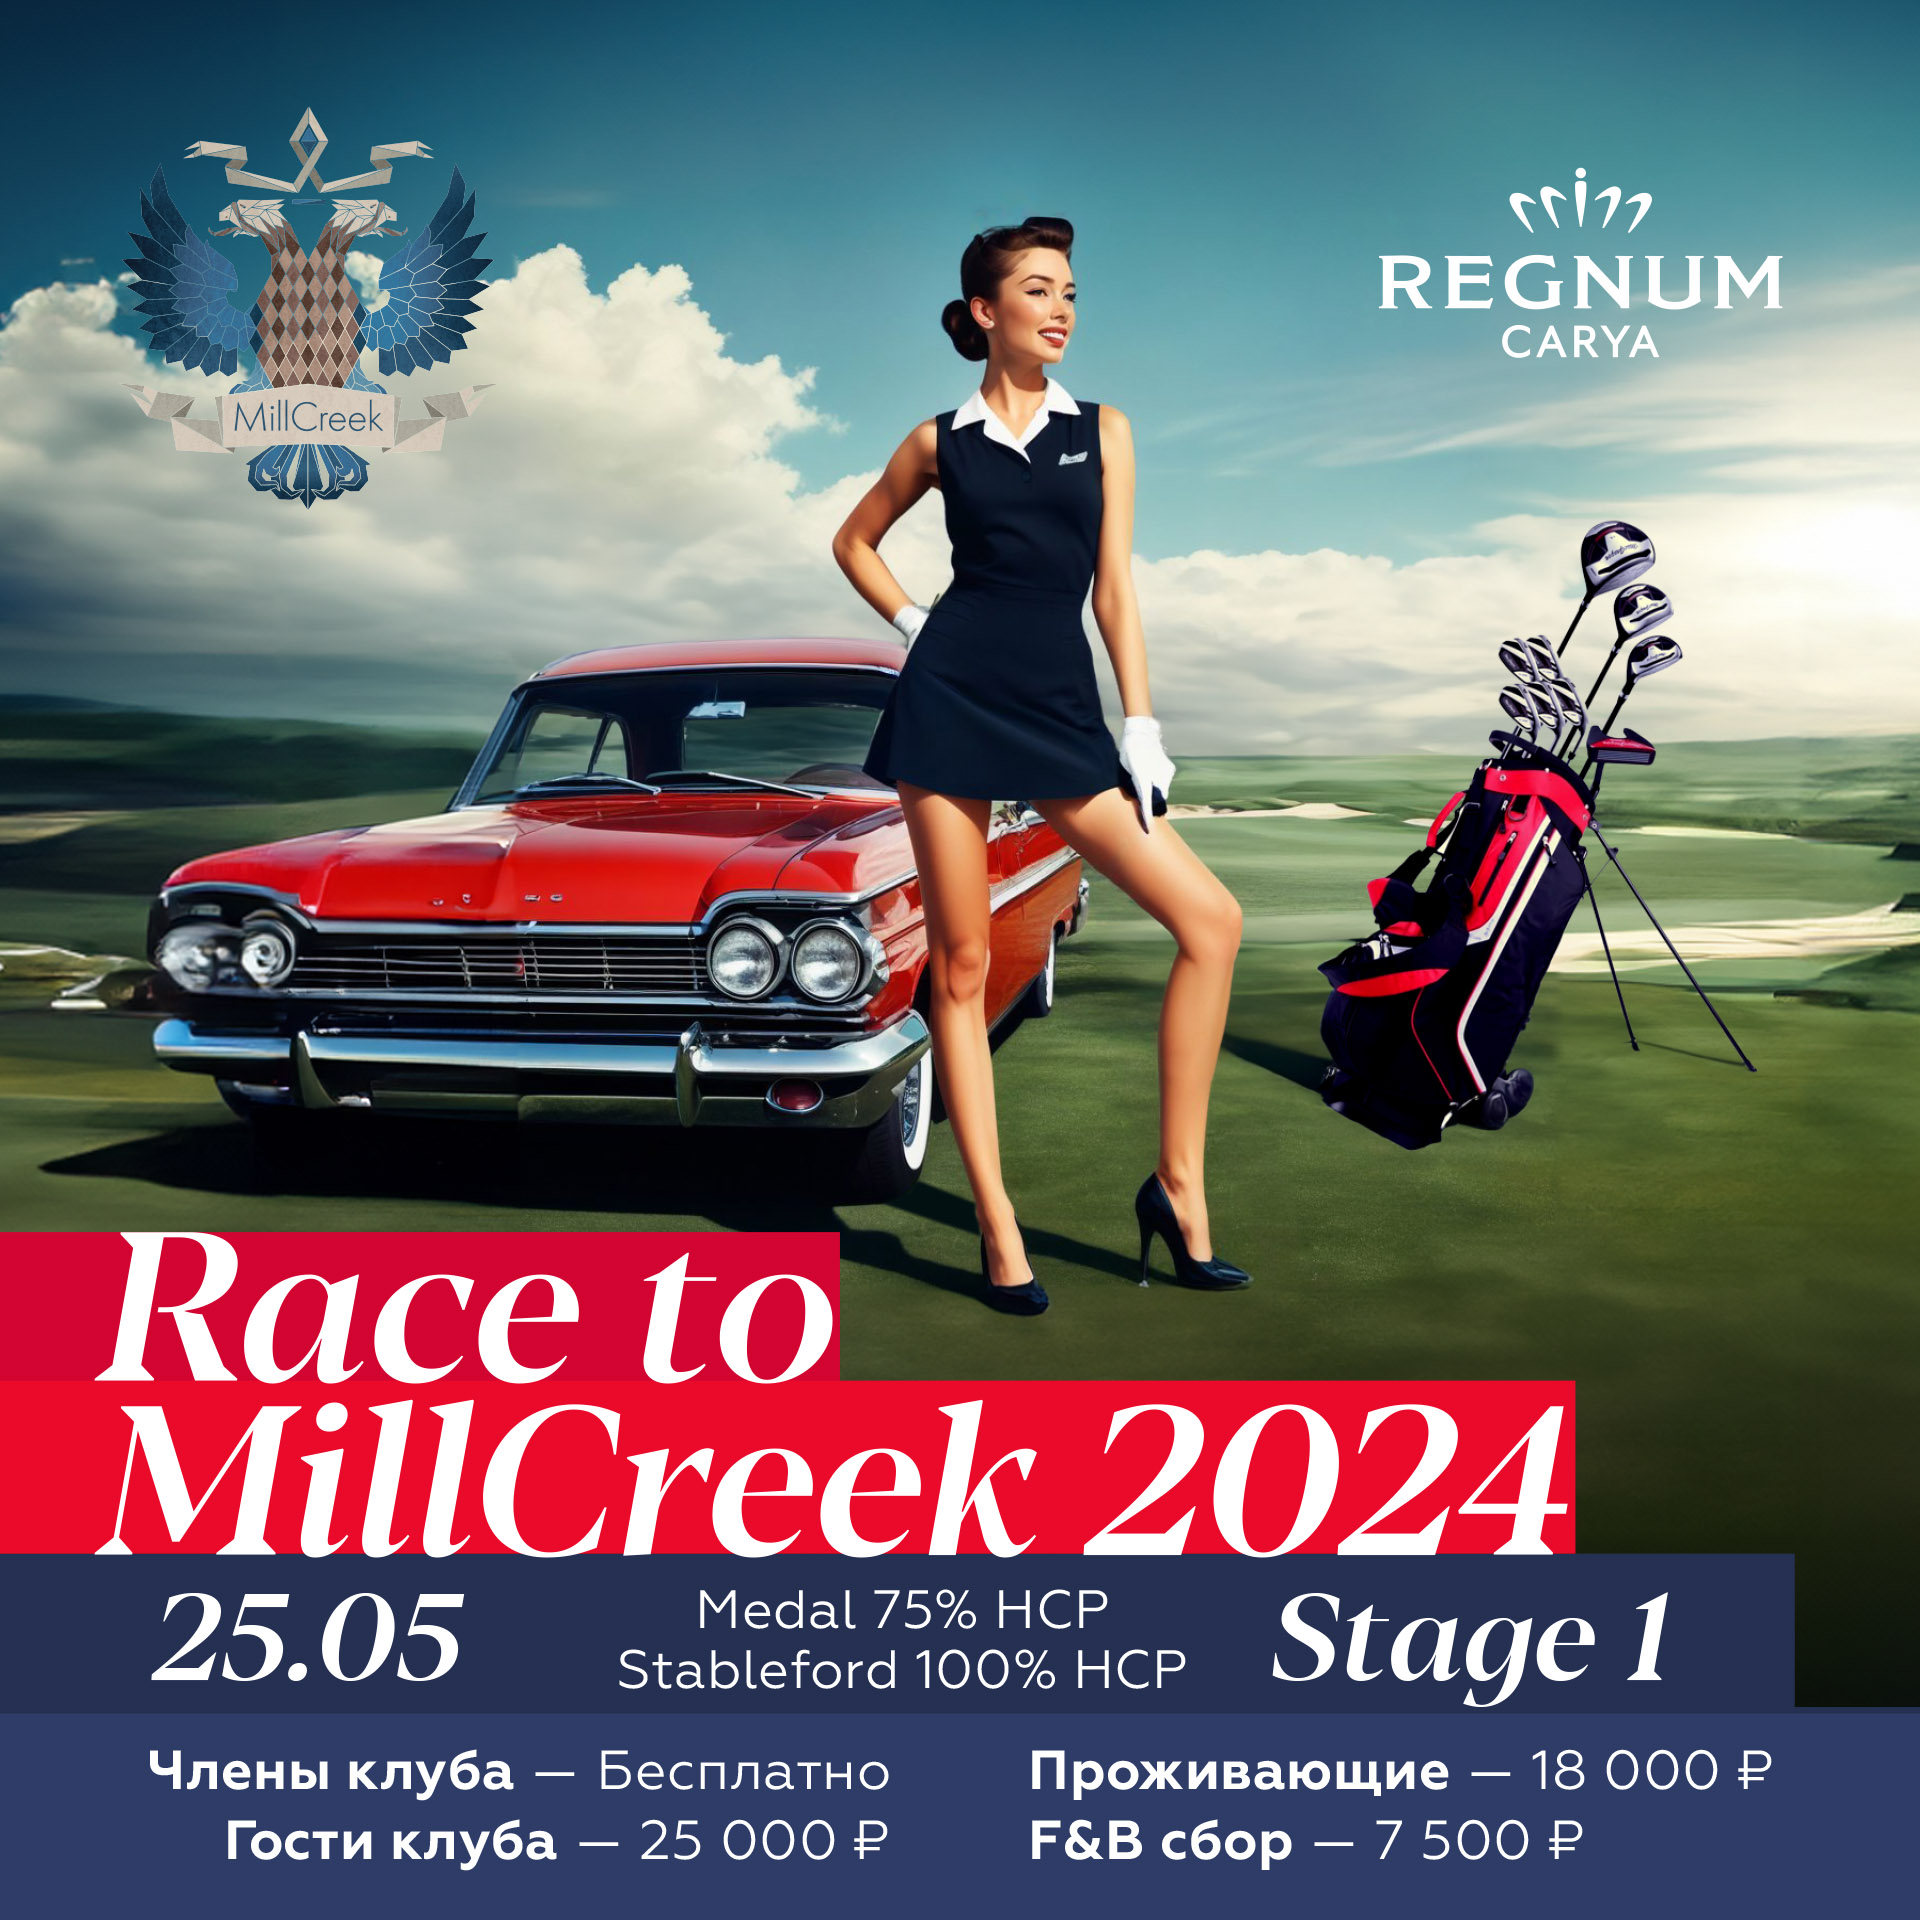 Stage 1 of the Race to MillCreek 2024 tournament series